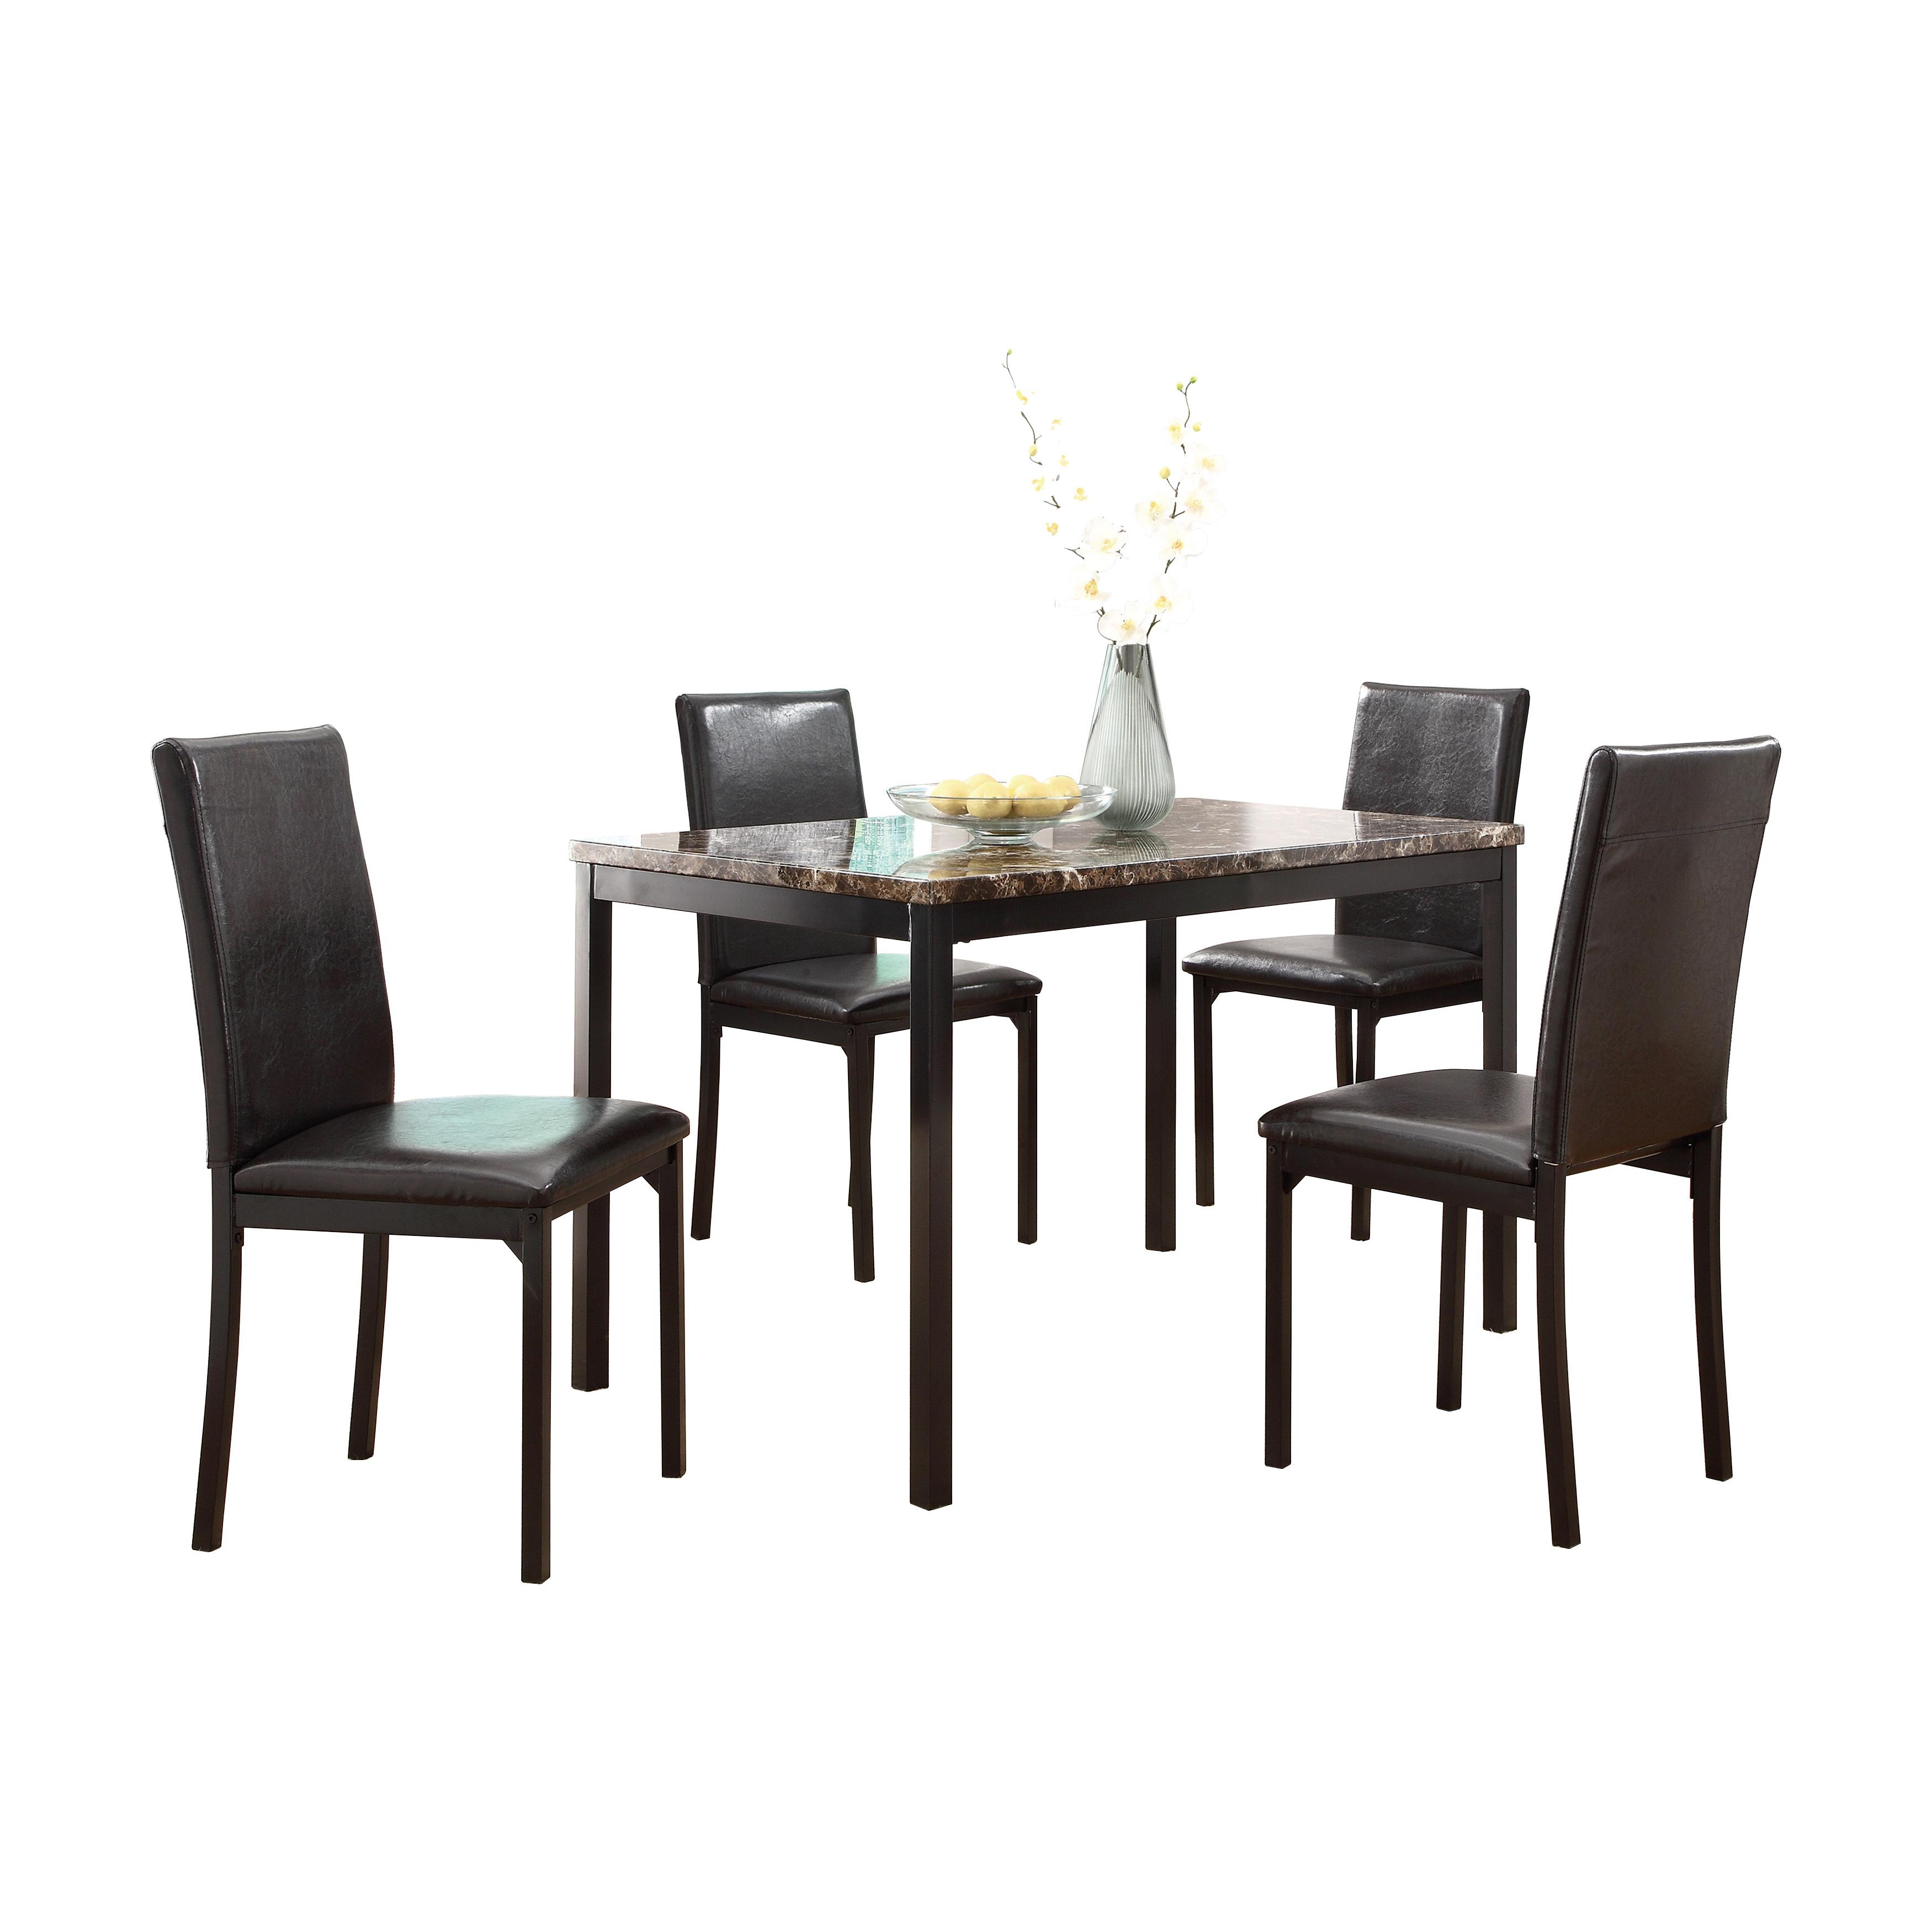 Transitional Dining Room Set 2601-48*5PC Tempe 2601-48*5PC in Brown Faux Leather